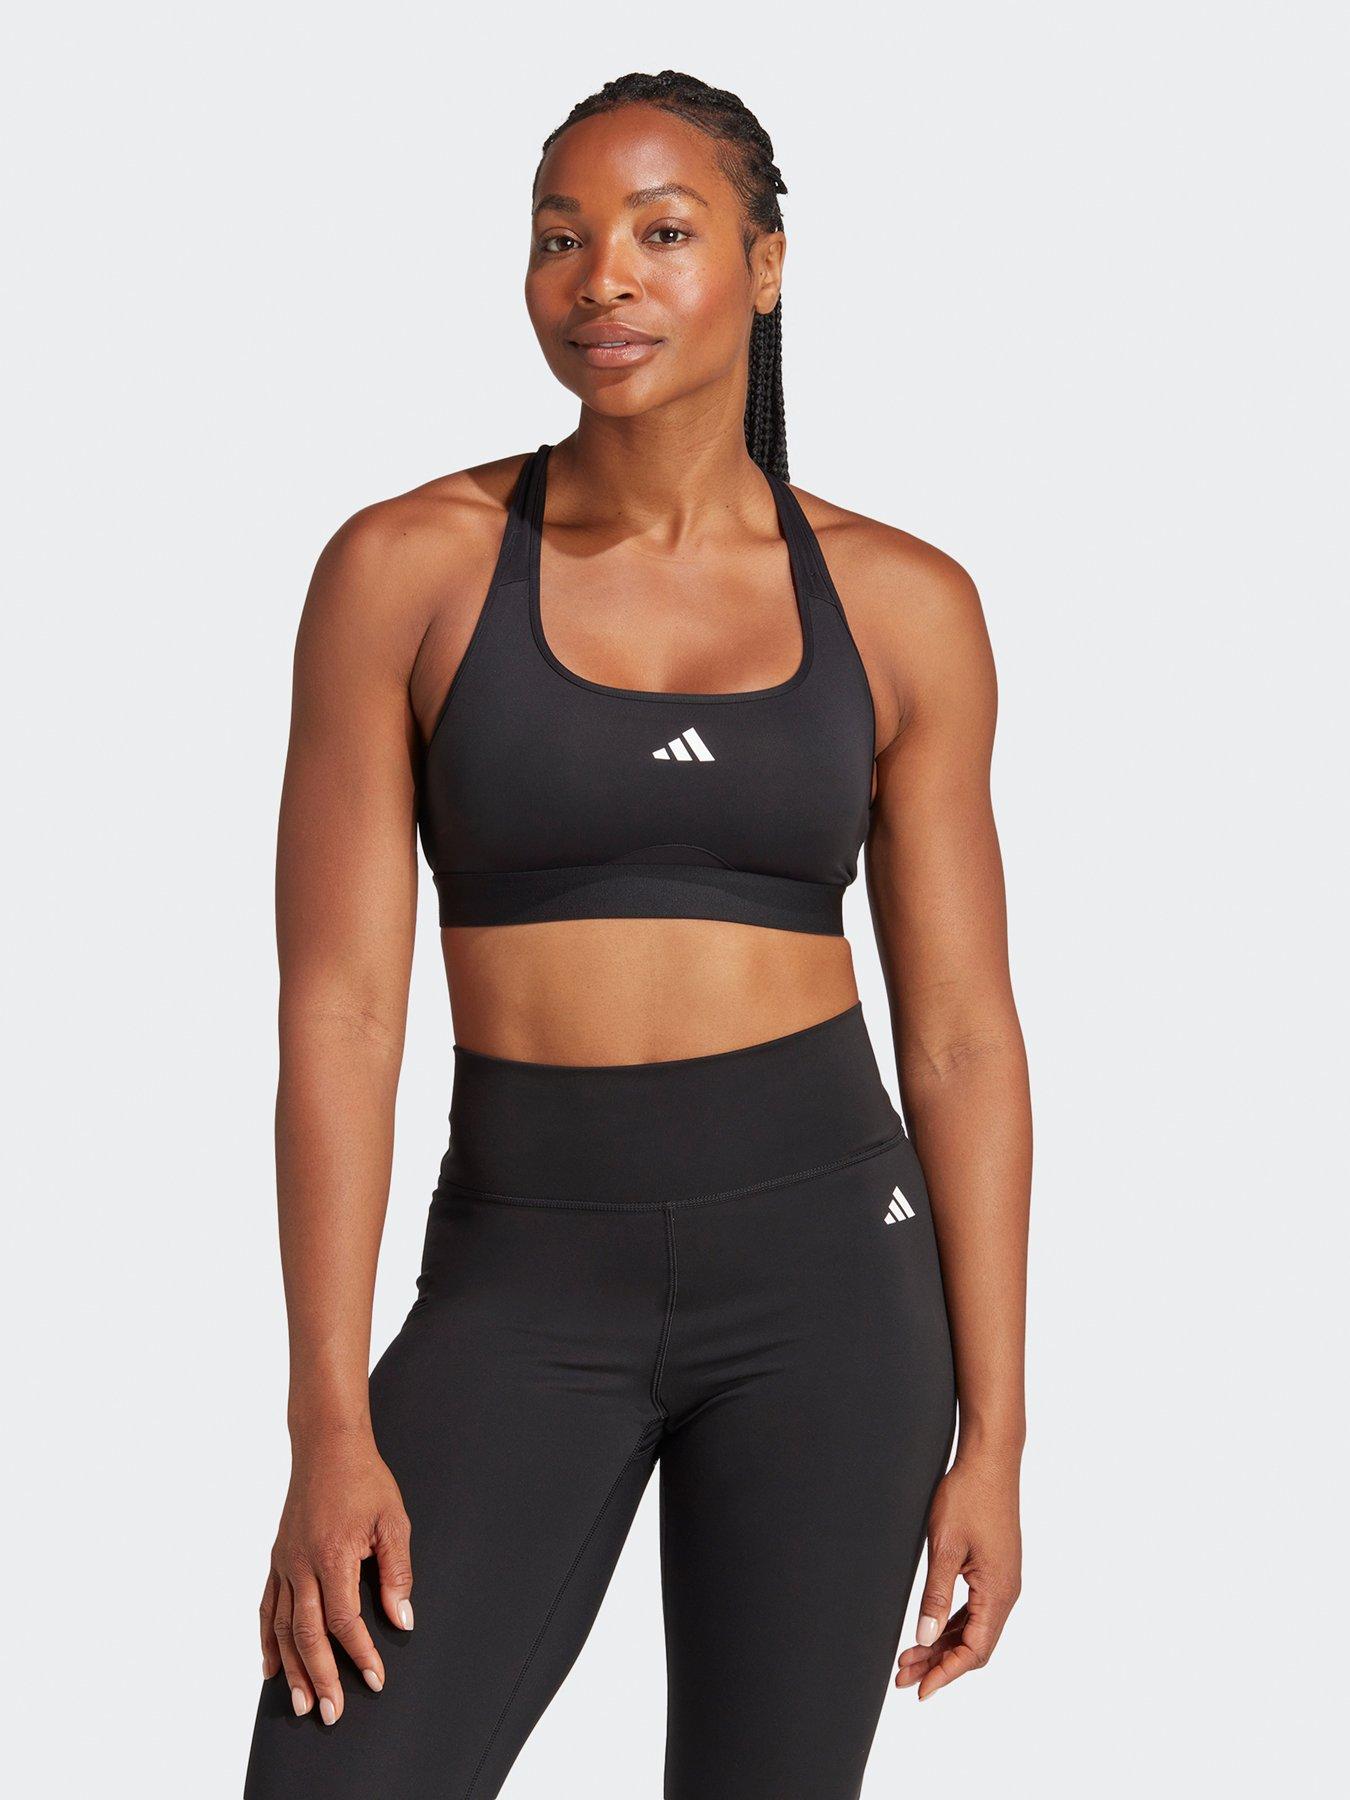 adidas Womens TLRD Move Training High-Support Bra (Plus Size) Black 3X